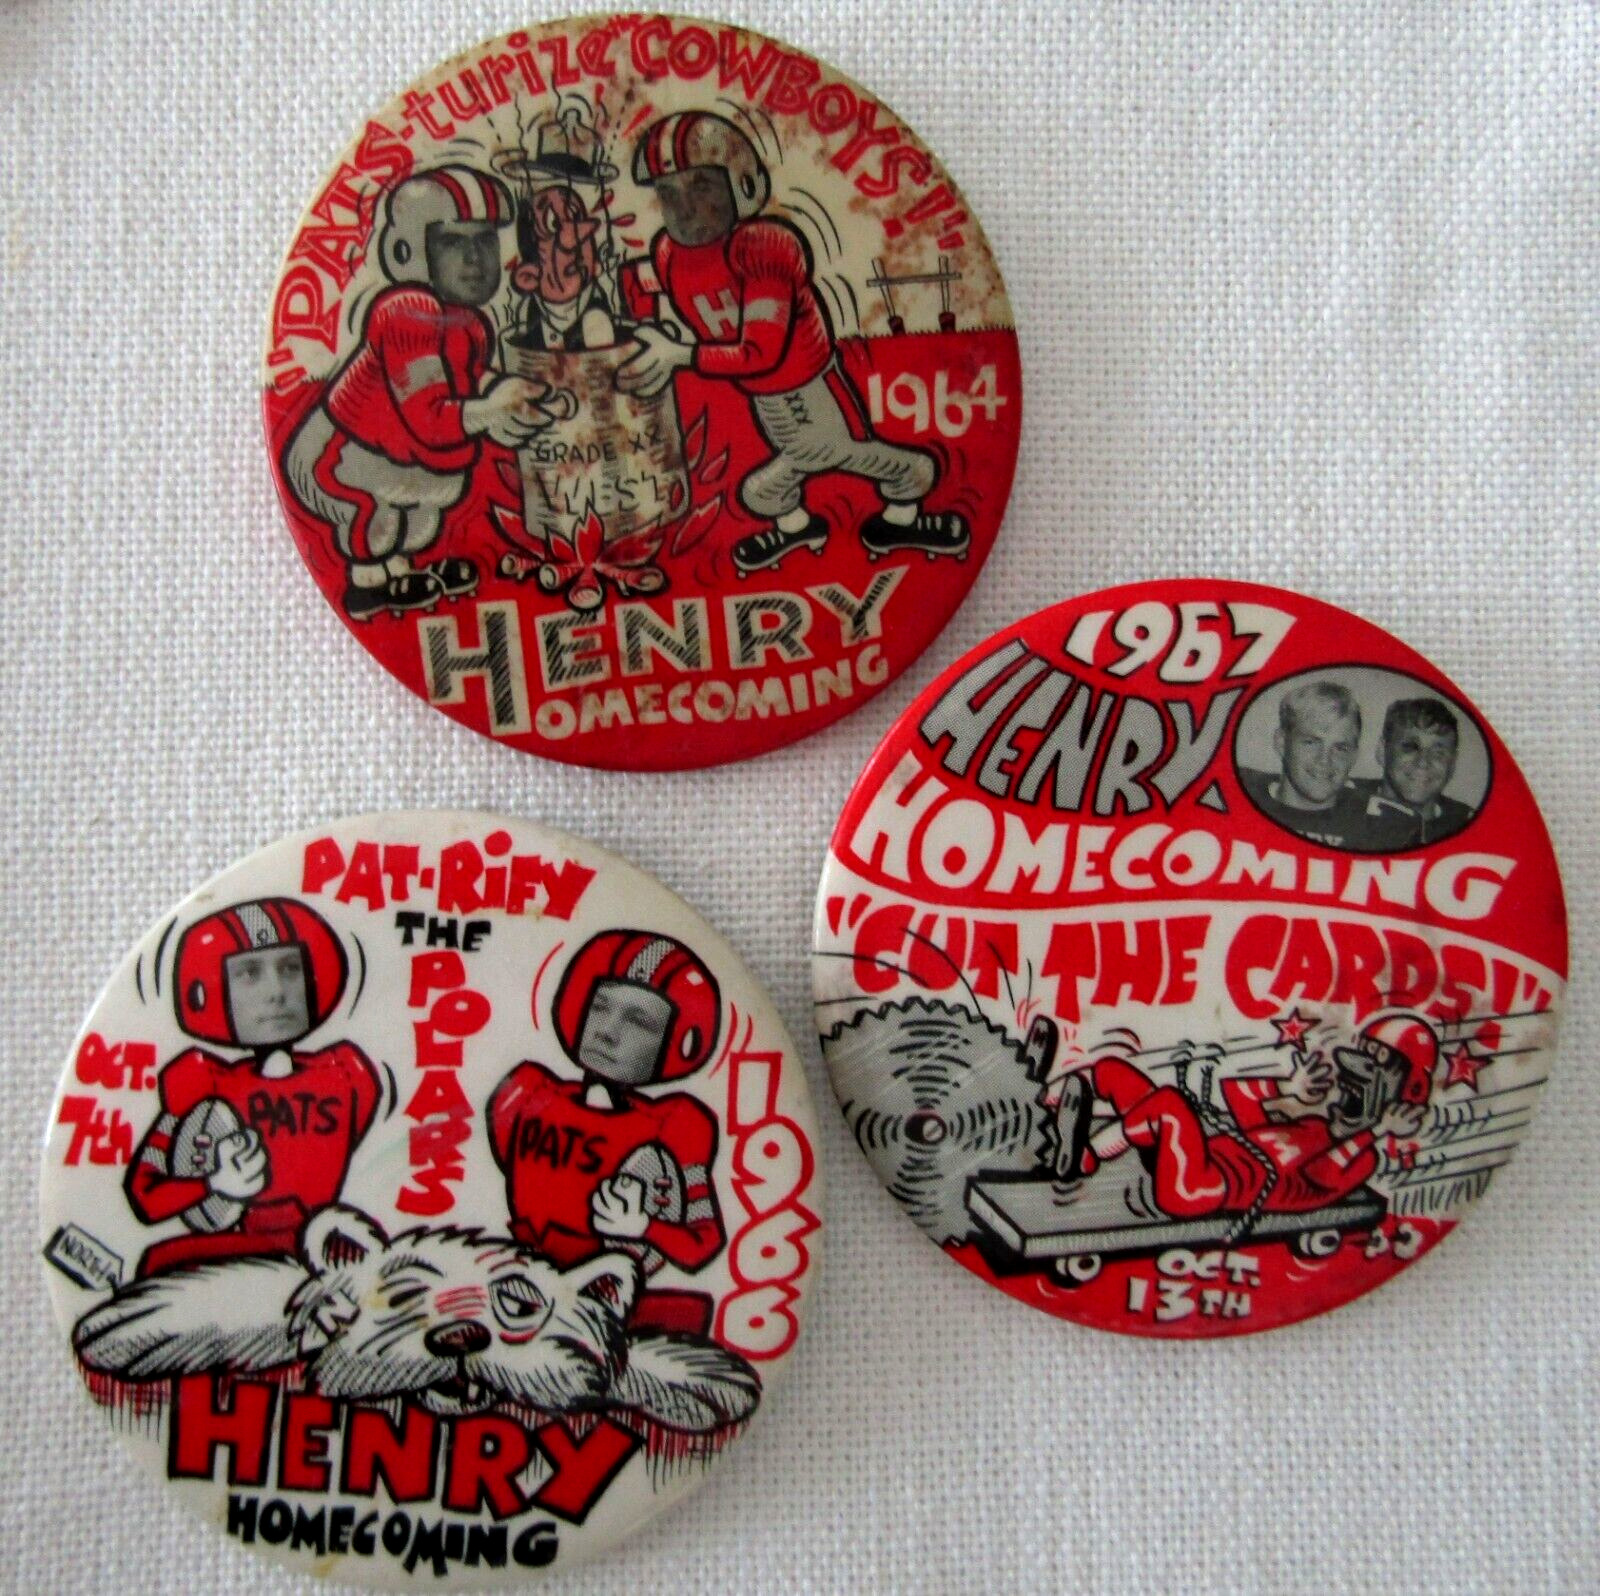 Vintage 1964 1966 1967 Patrick Henry High School Minneapolis Homecoming Buttons